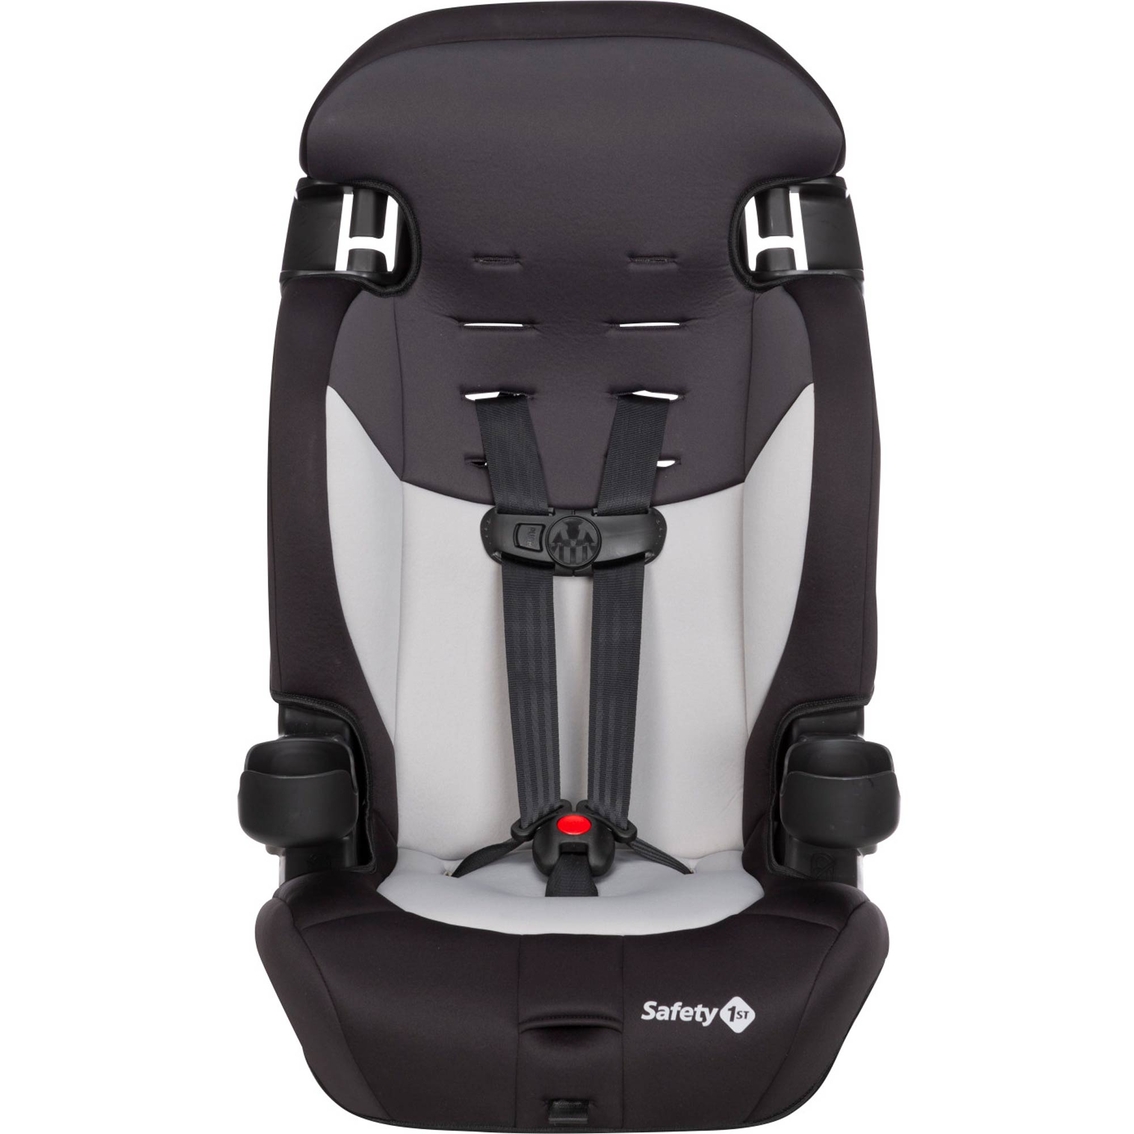 Safety 1st Grand 2 in 1 Booster Car Seat - Image 8 of 9